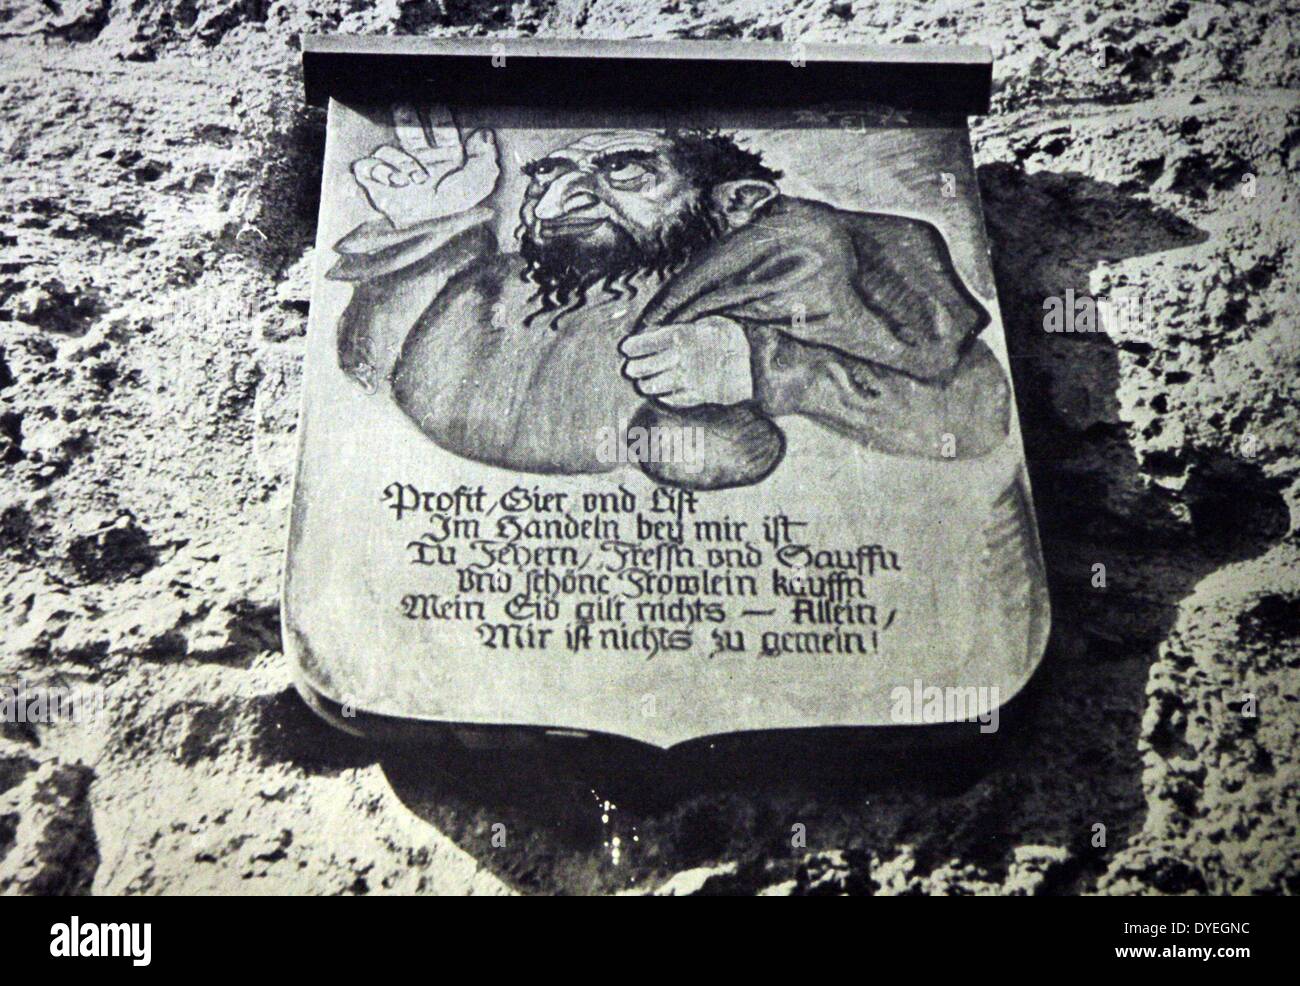 Inscription on the town wall of Rothenburg, Germany. The placard shows a Jew clutching a bag of money, and the text reads: Making big profits, Greed and craftiness is my business. I like celebrating, eating and drinking and like buying nice girls. My oath does not mean a thing - in fact nothing is too low for me. Stock Photo